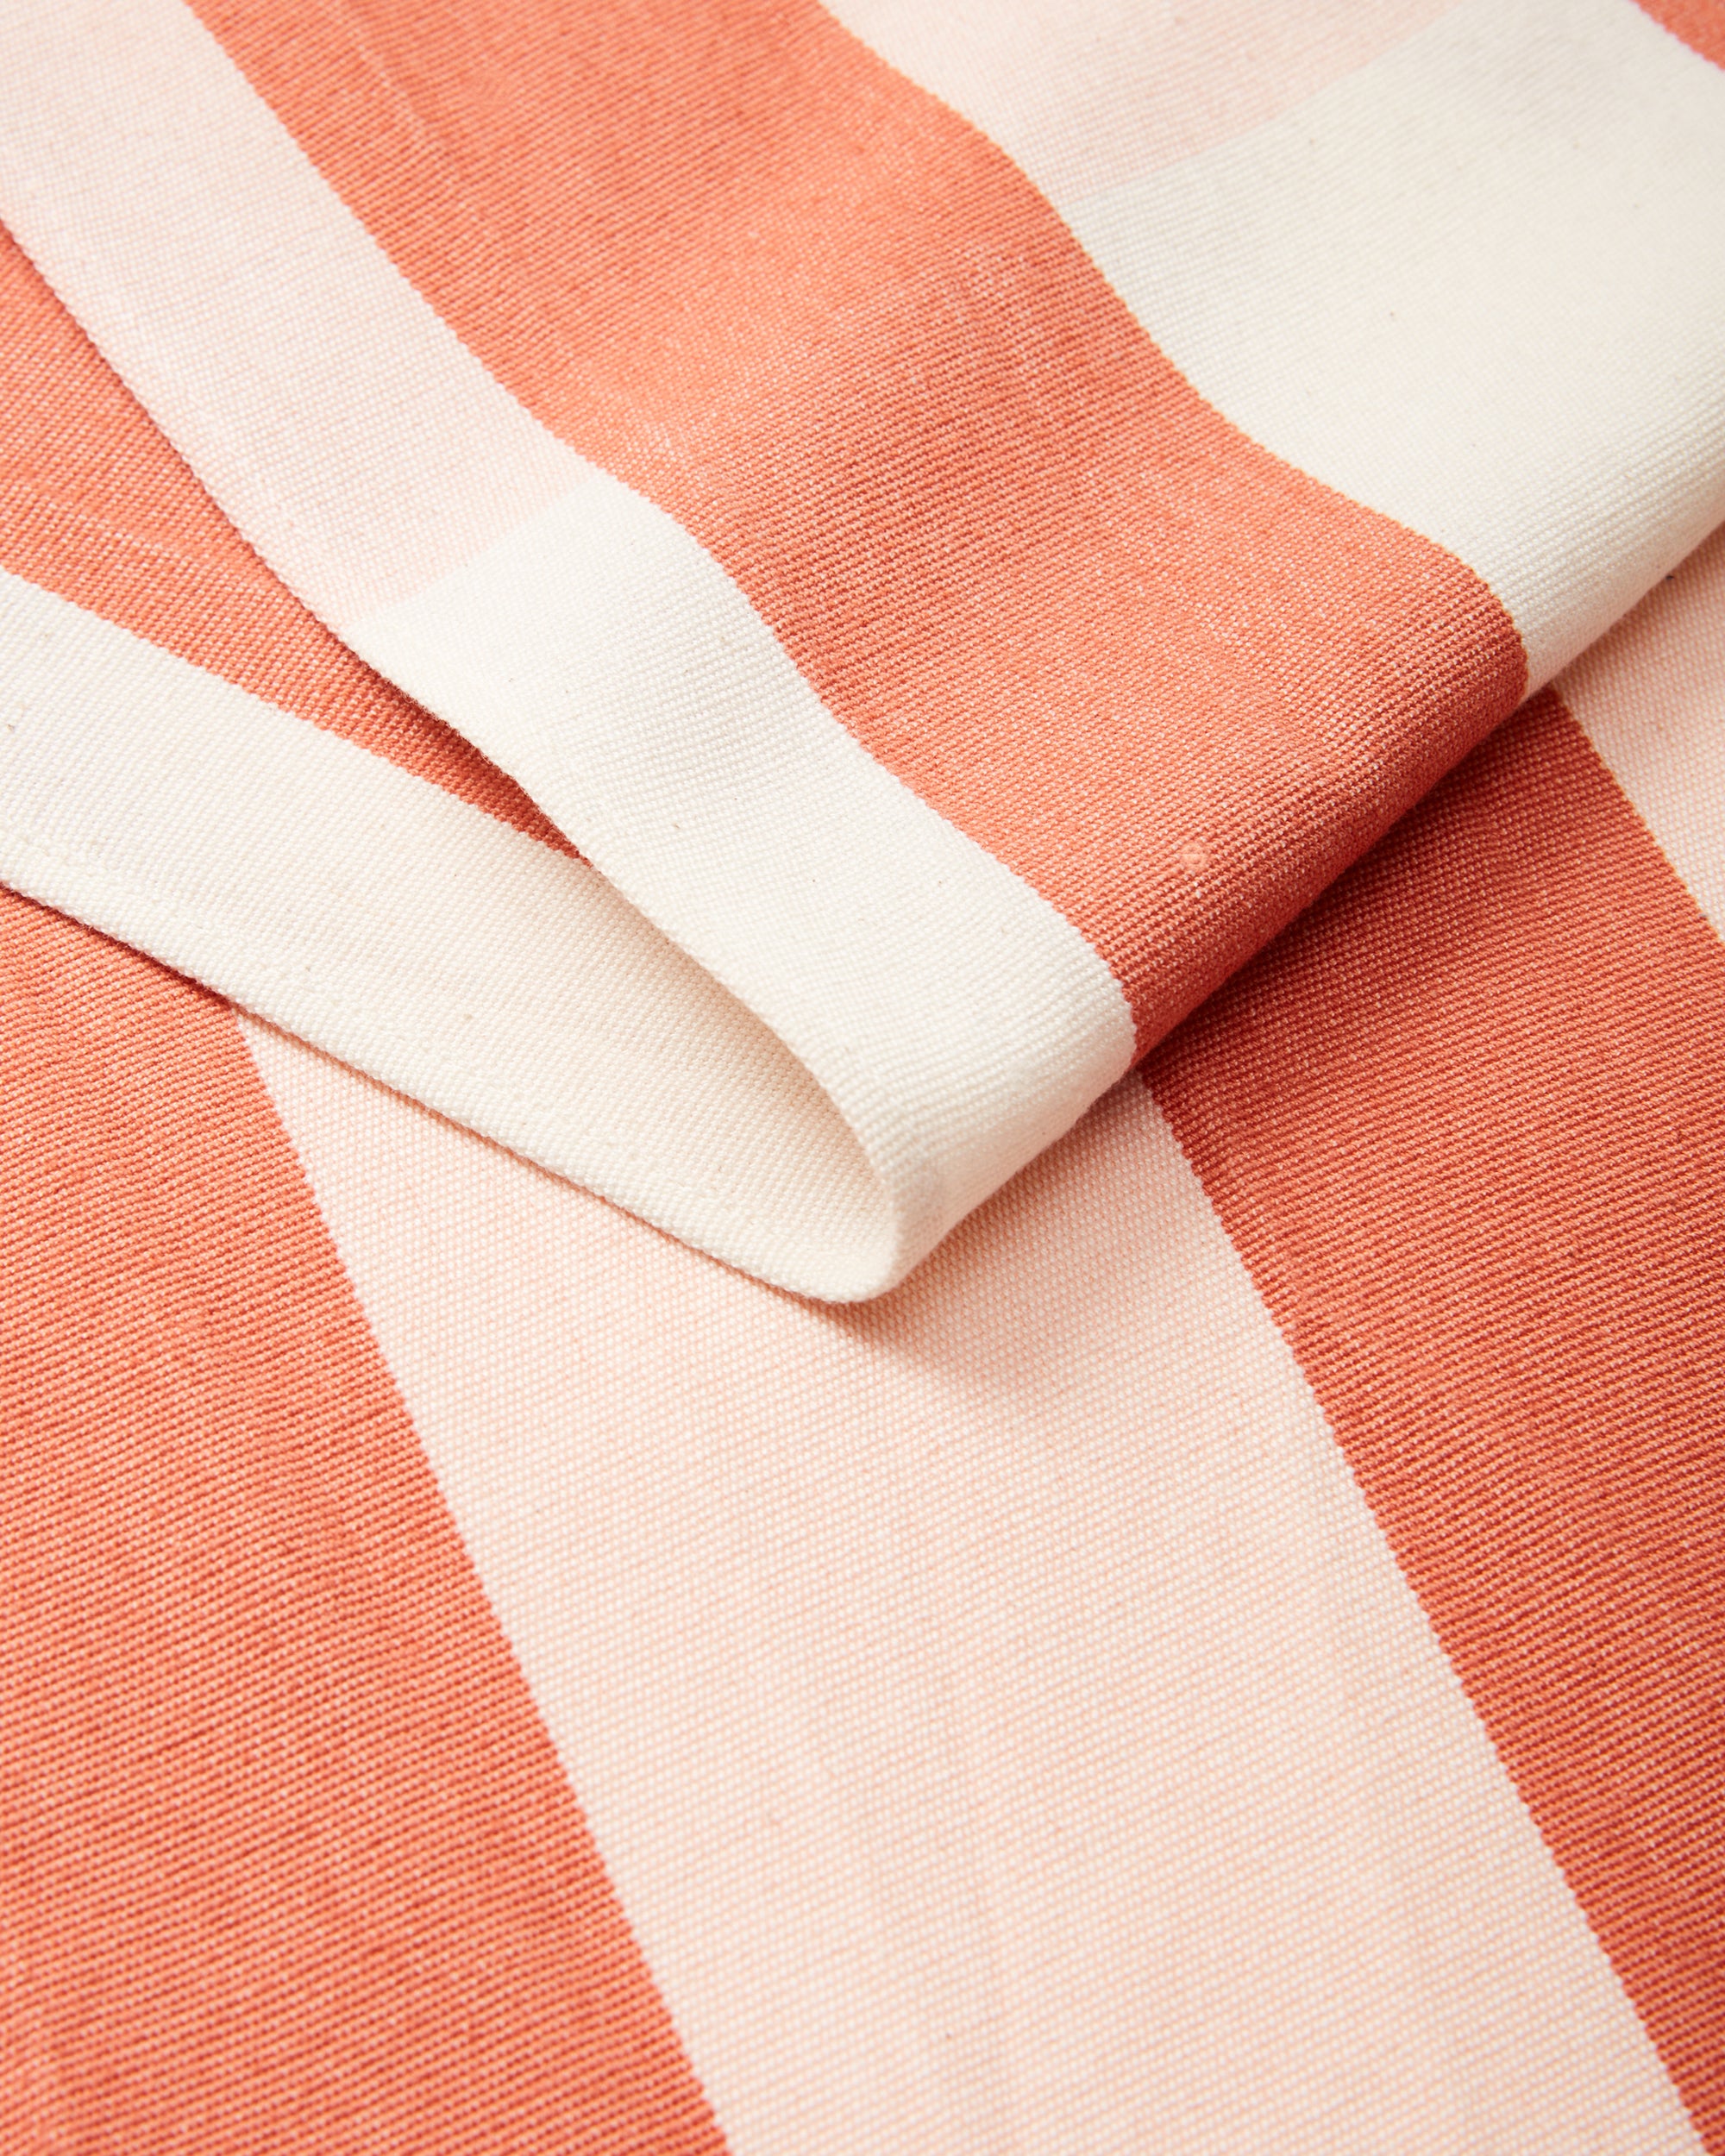 close-up detail ethically handwoven cotton table runner stripes coral peach